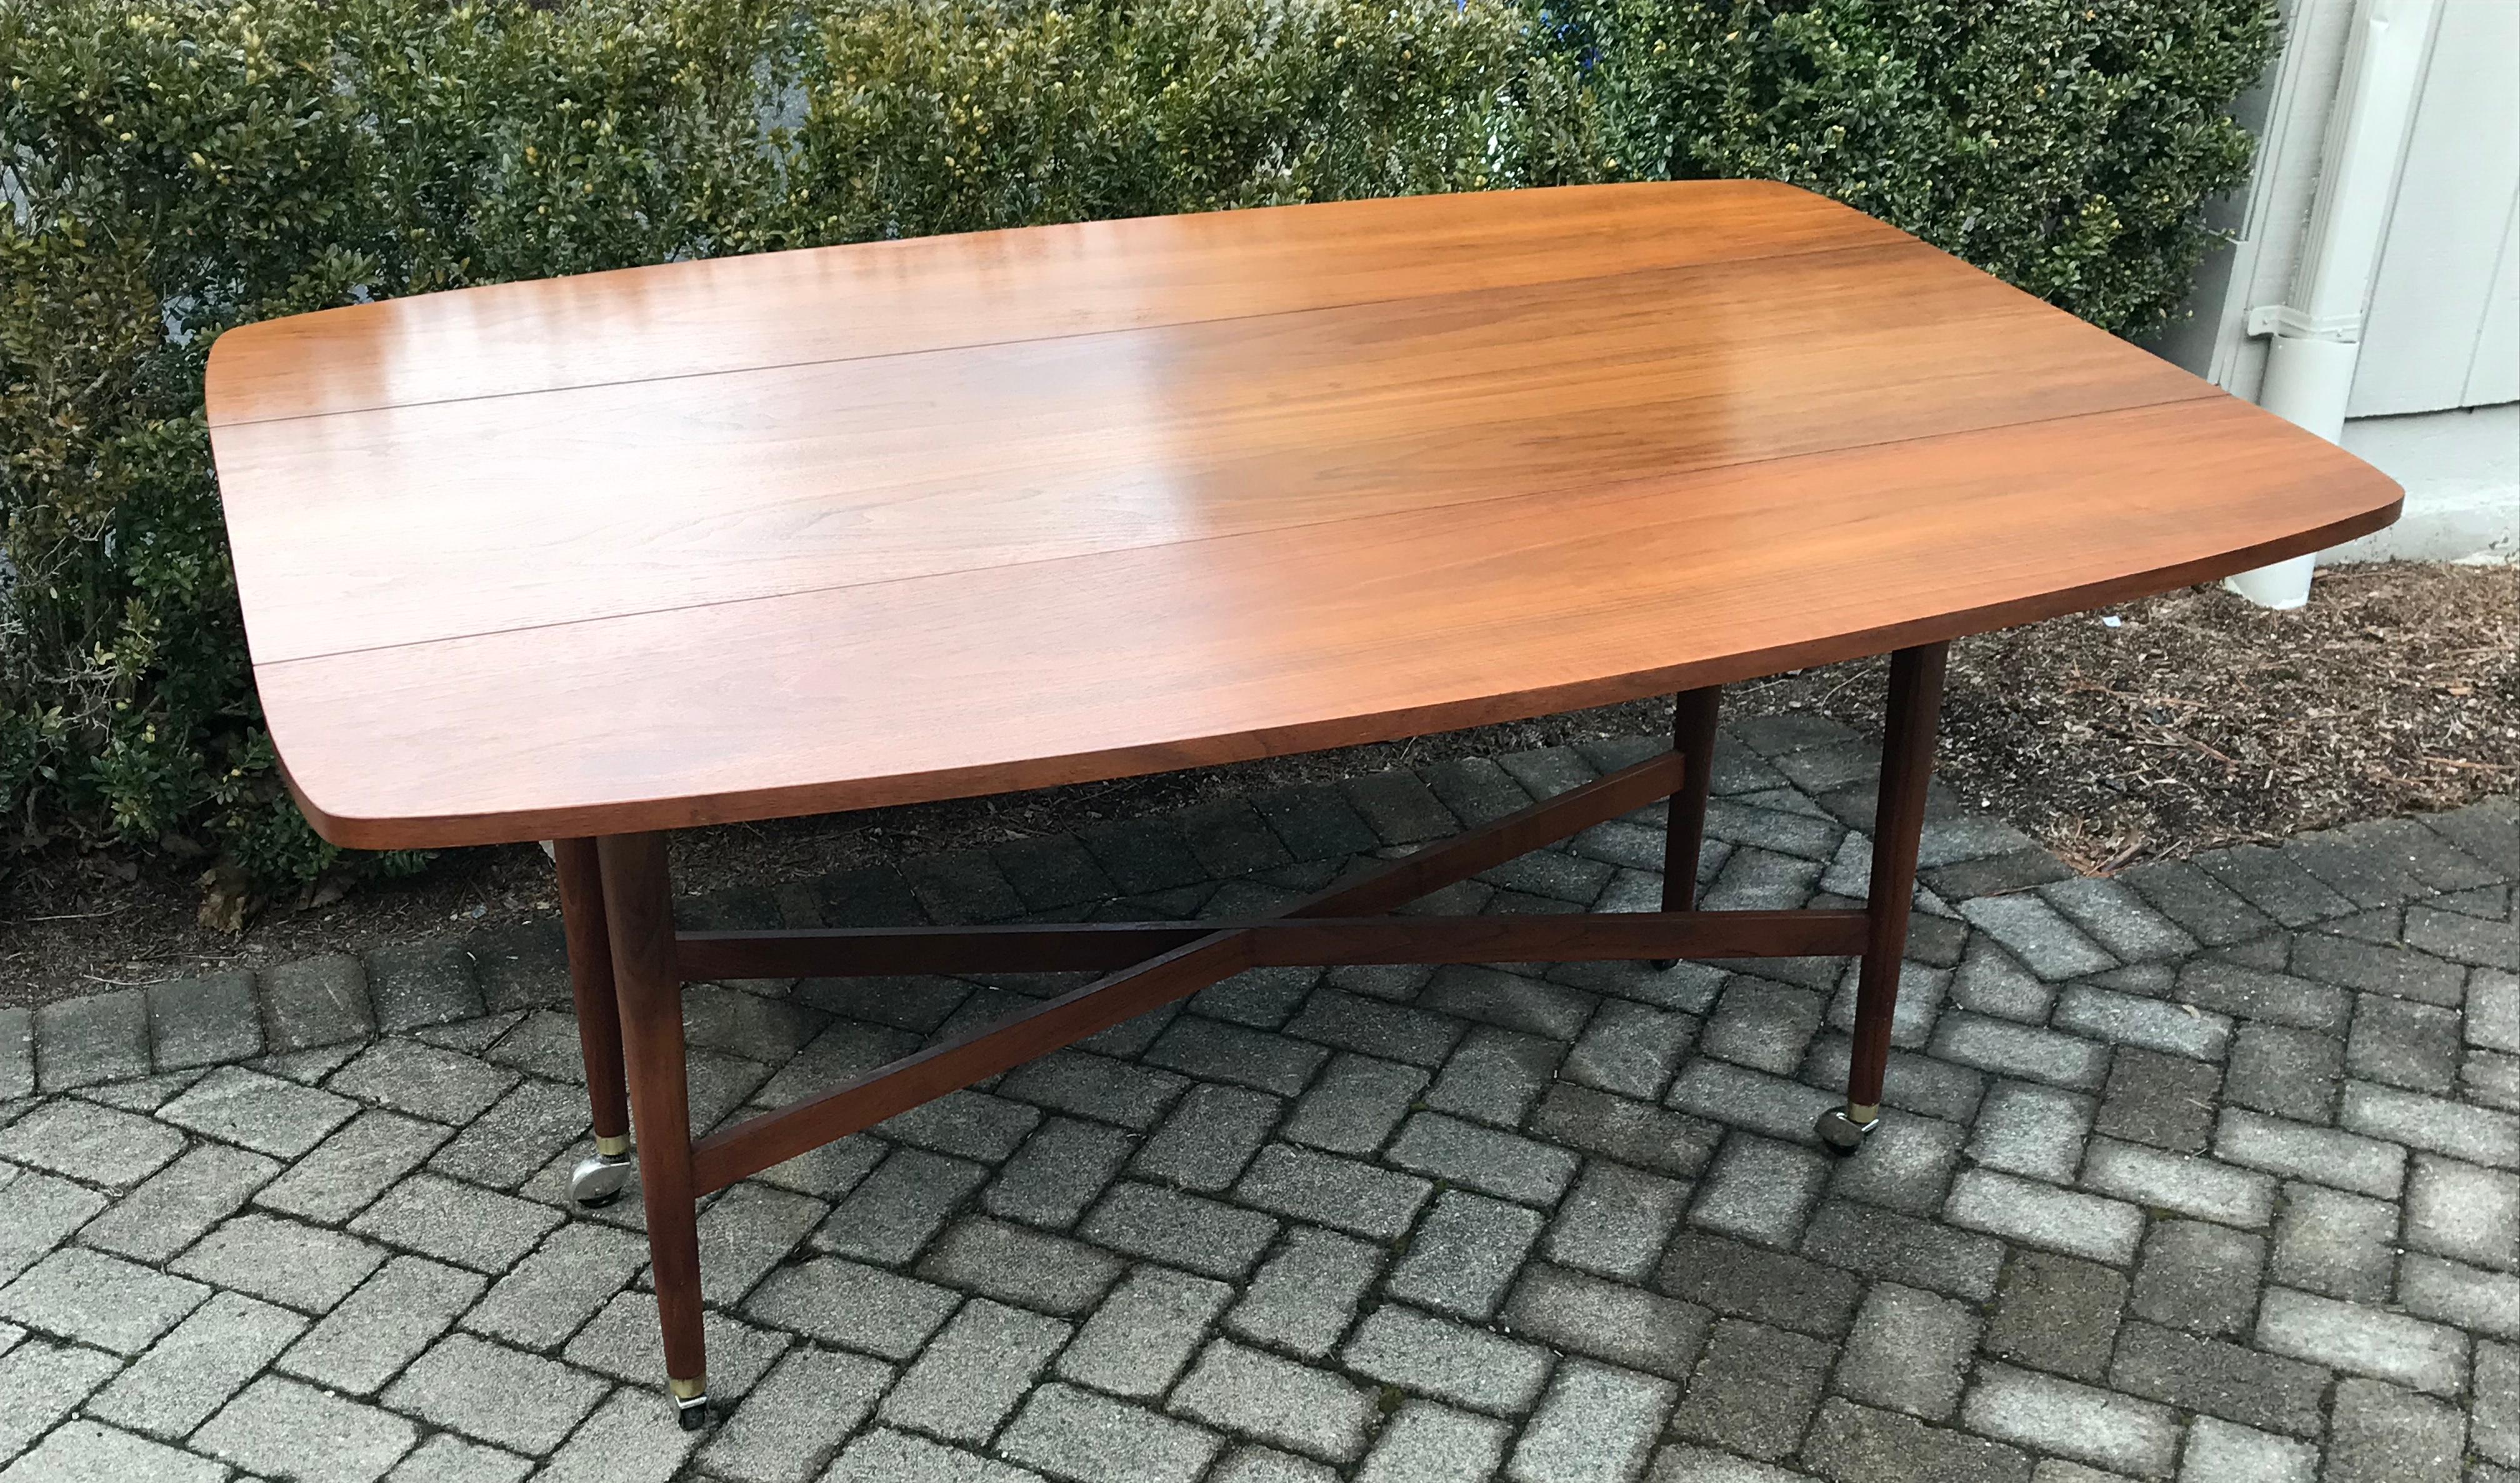 Beautiful midcentury walnut drop leaf dining table by Drexel. Part of the Declaration series, it has clean rounded corners, X-base leg detail and original castors. Very solid and well constructed. Great condition, very minor paint slivers in grain